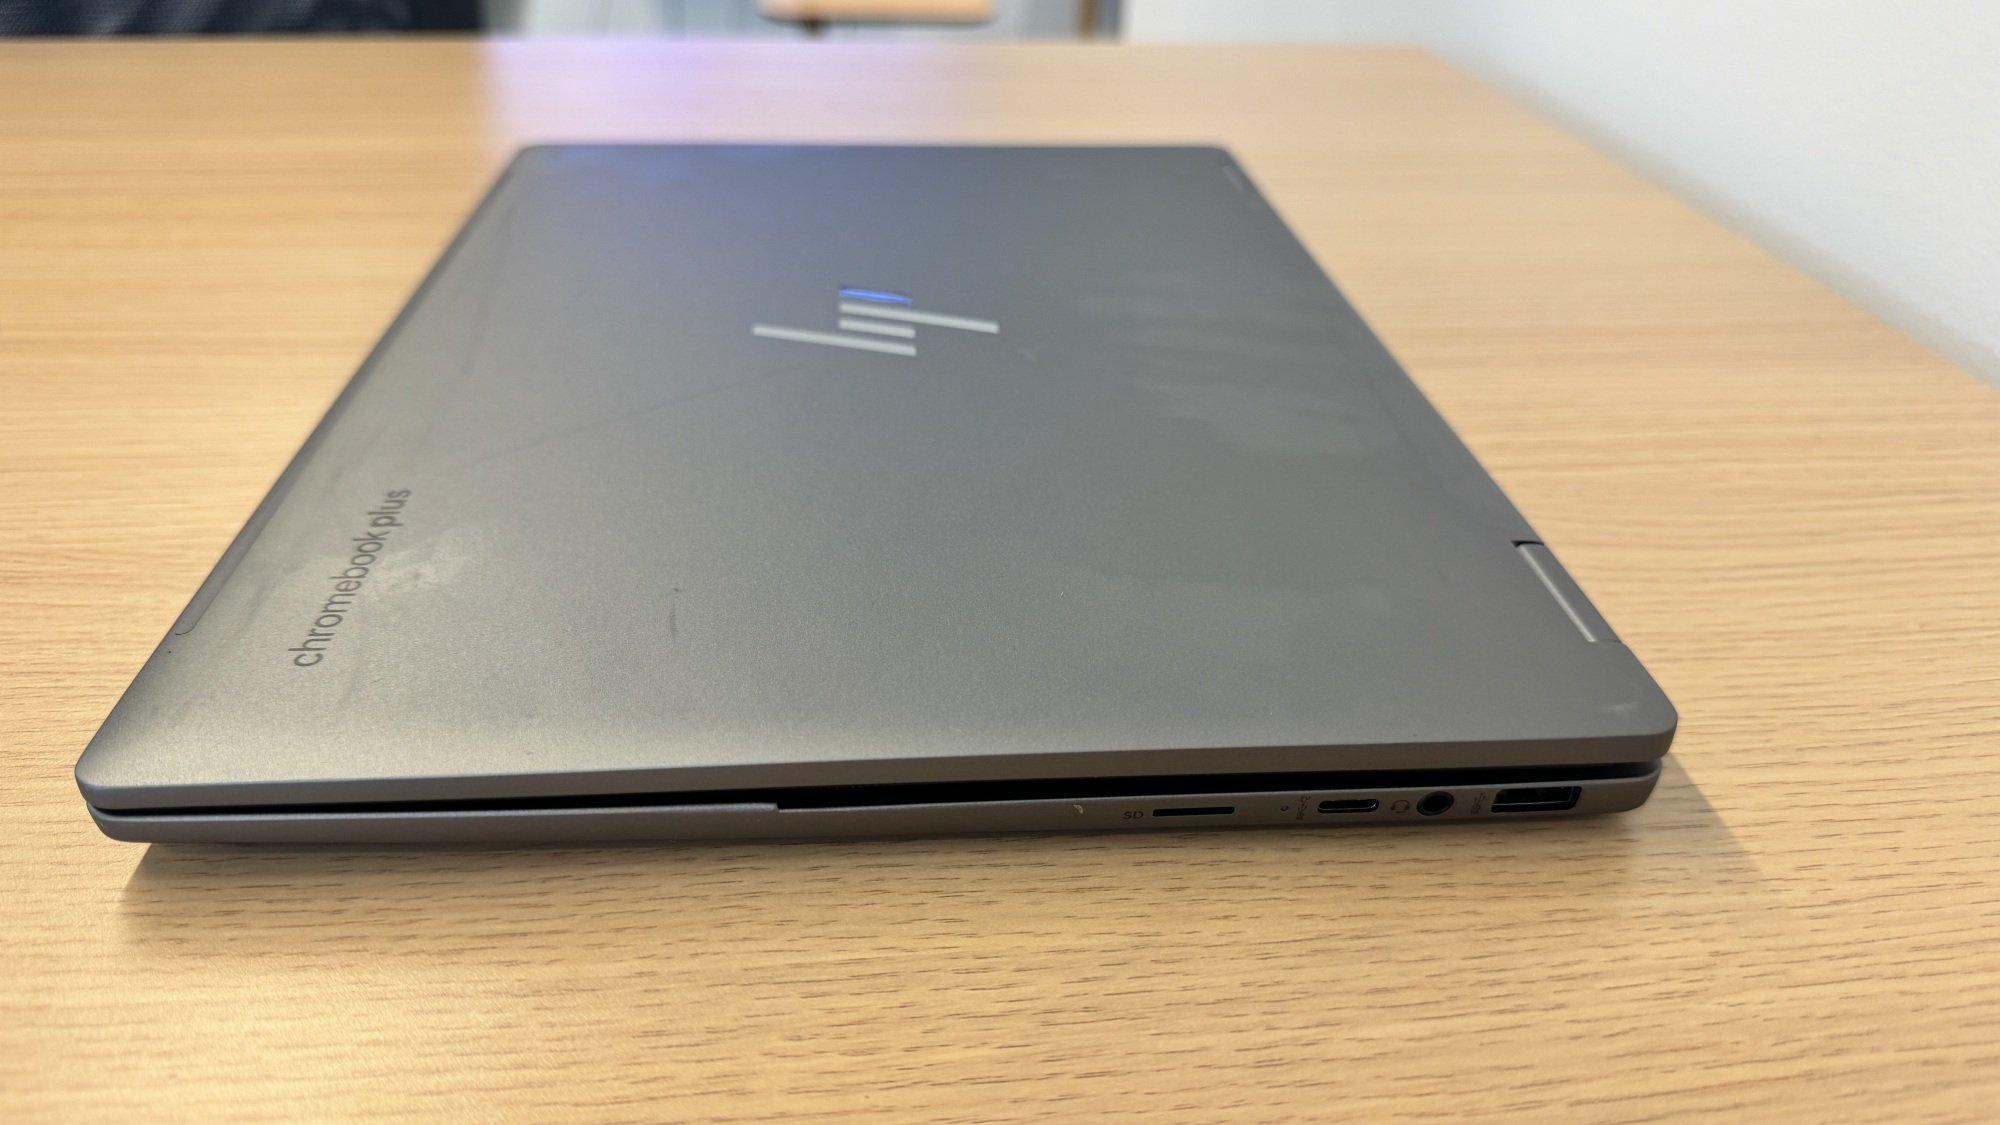 The cover of the HP Chromebook Plus x360 14c